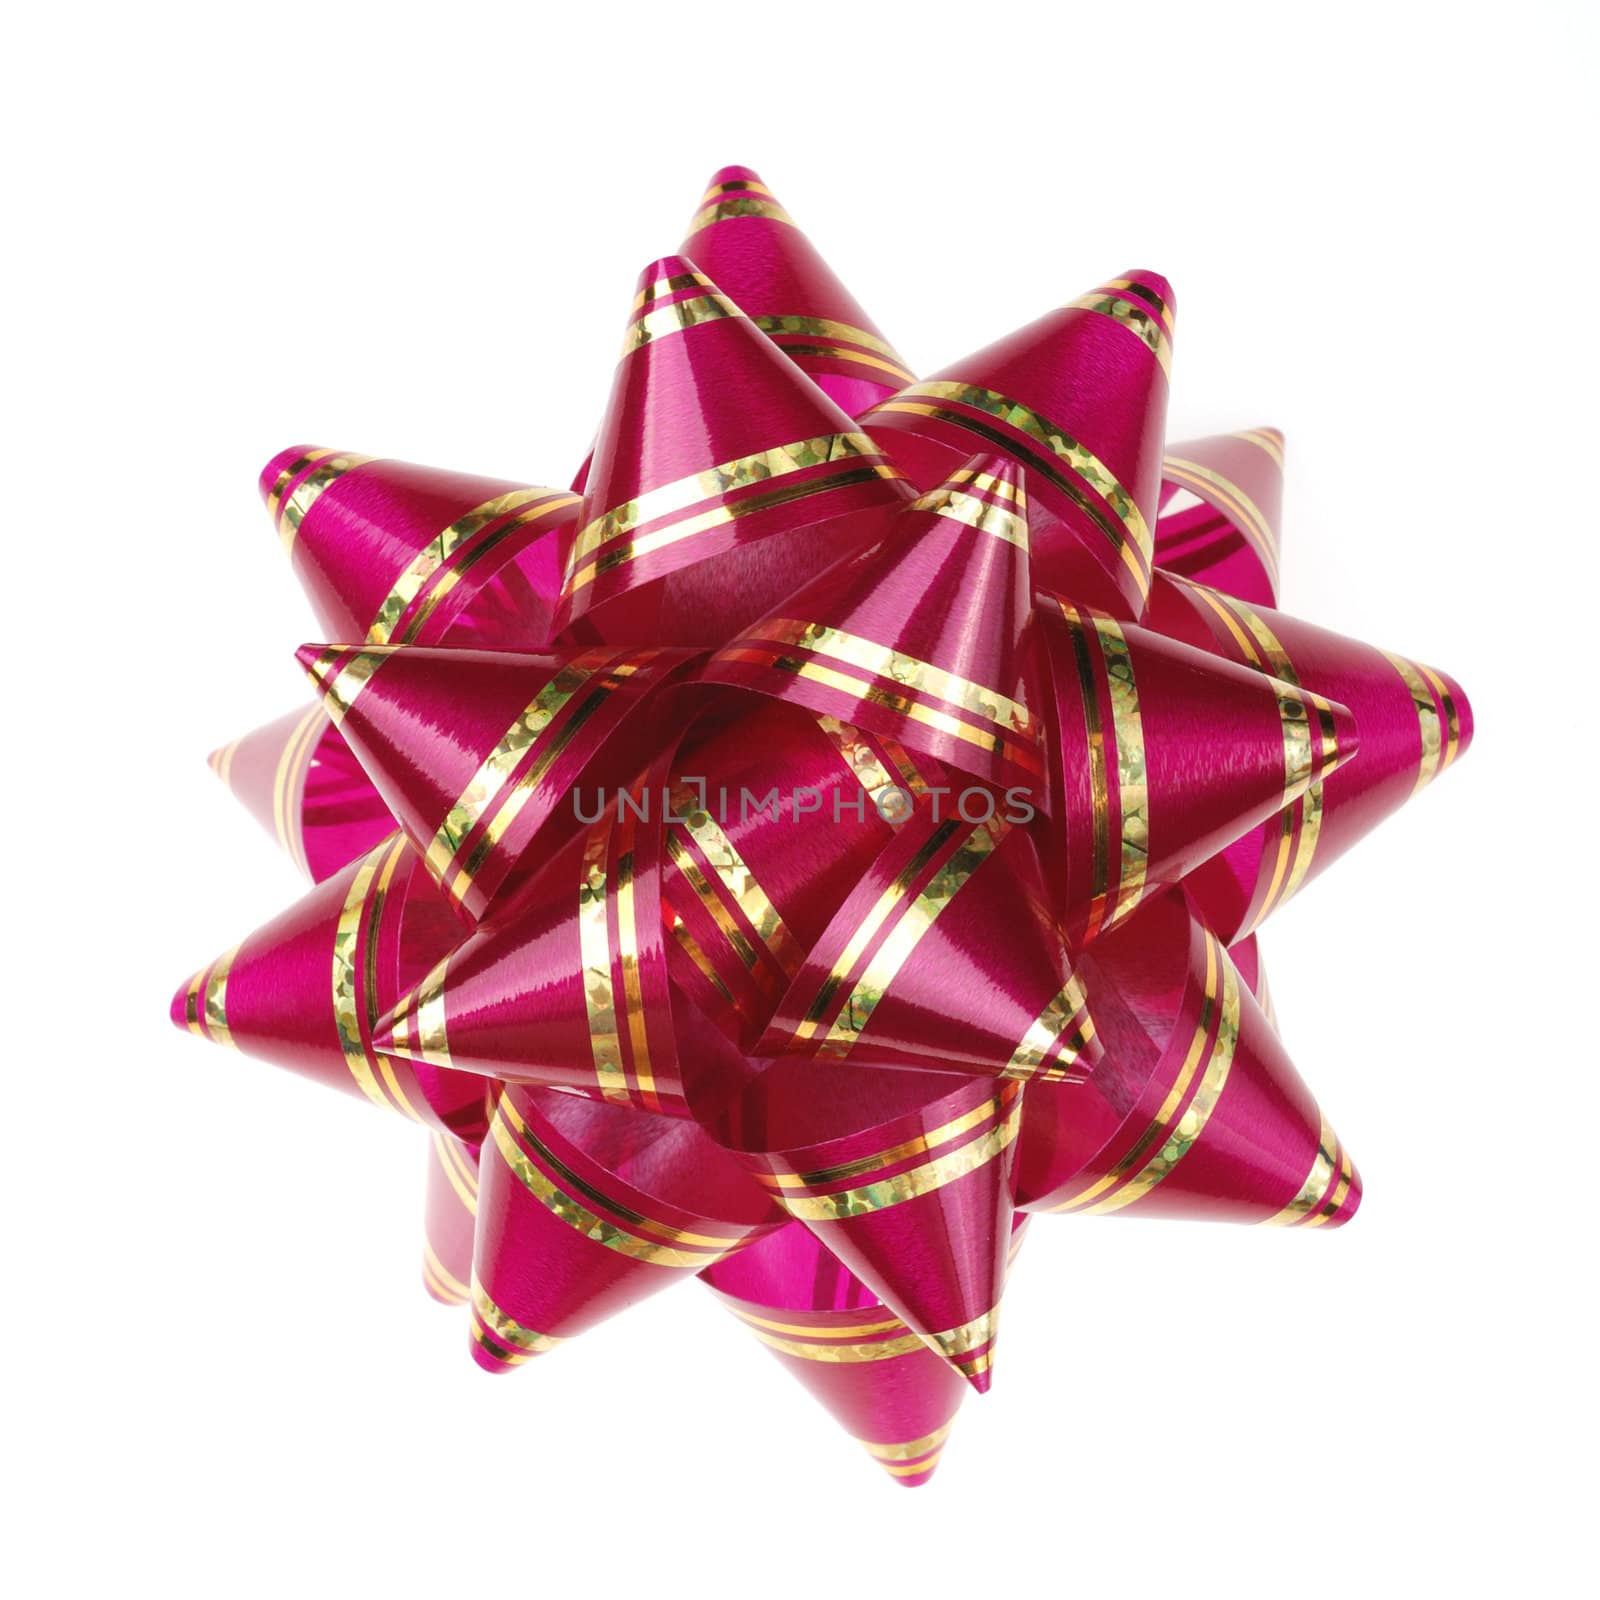 Decorative ornament from tapes - red. The details of ornaments isolated on a white background